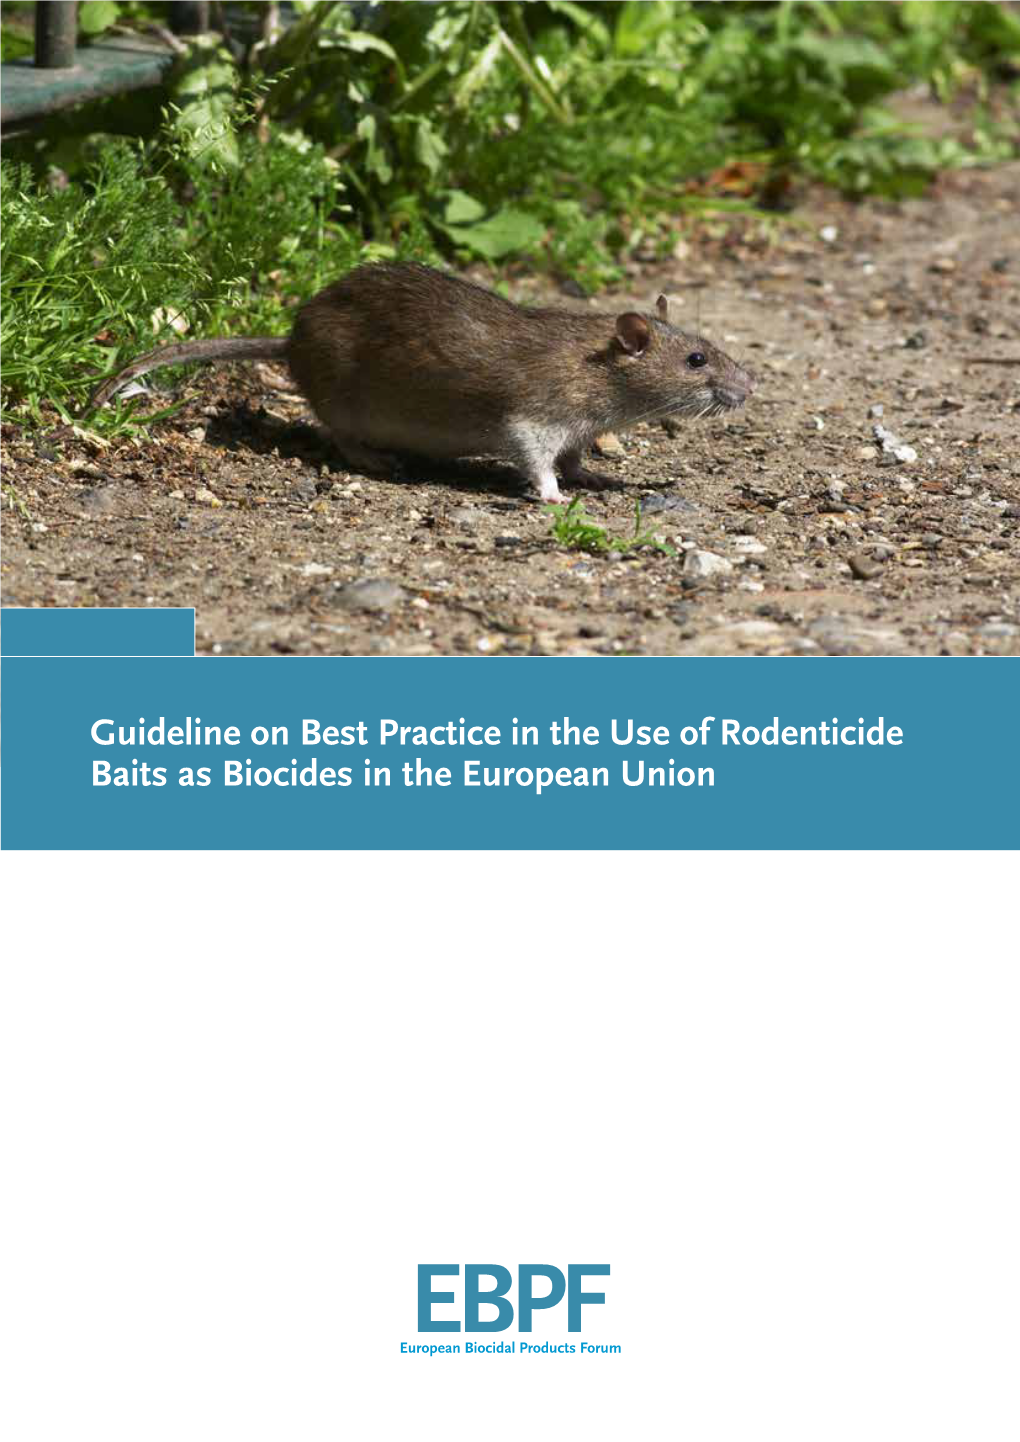 Guideline on Best Practice in the Use of Rodenticide Baits As Biocides in the European Union